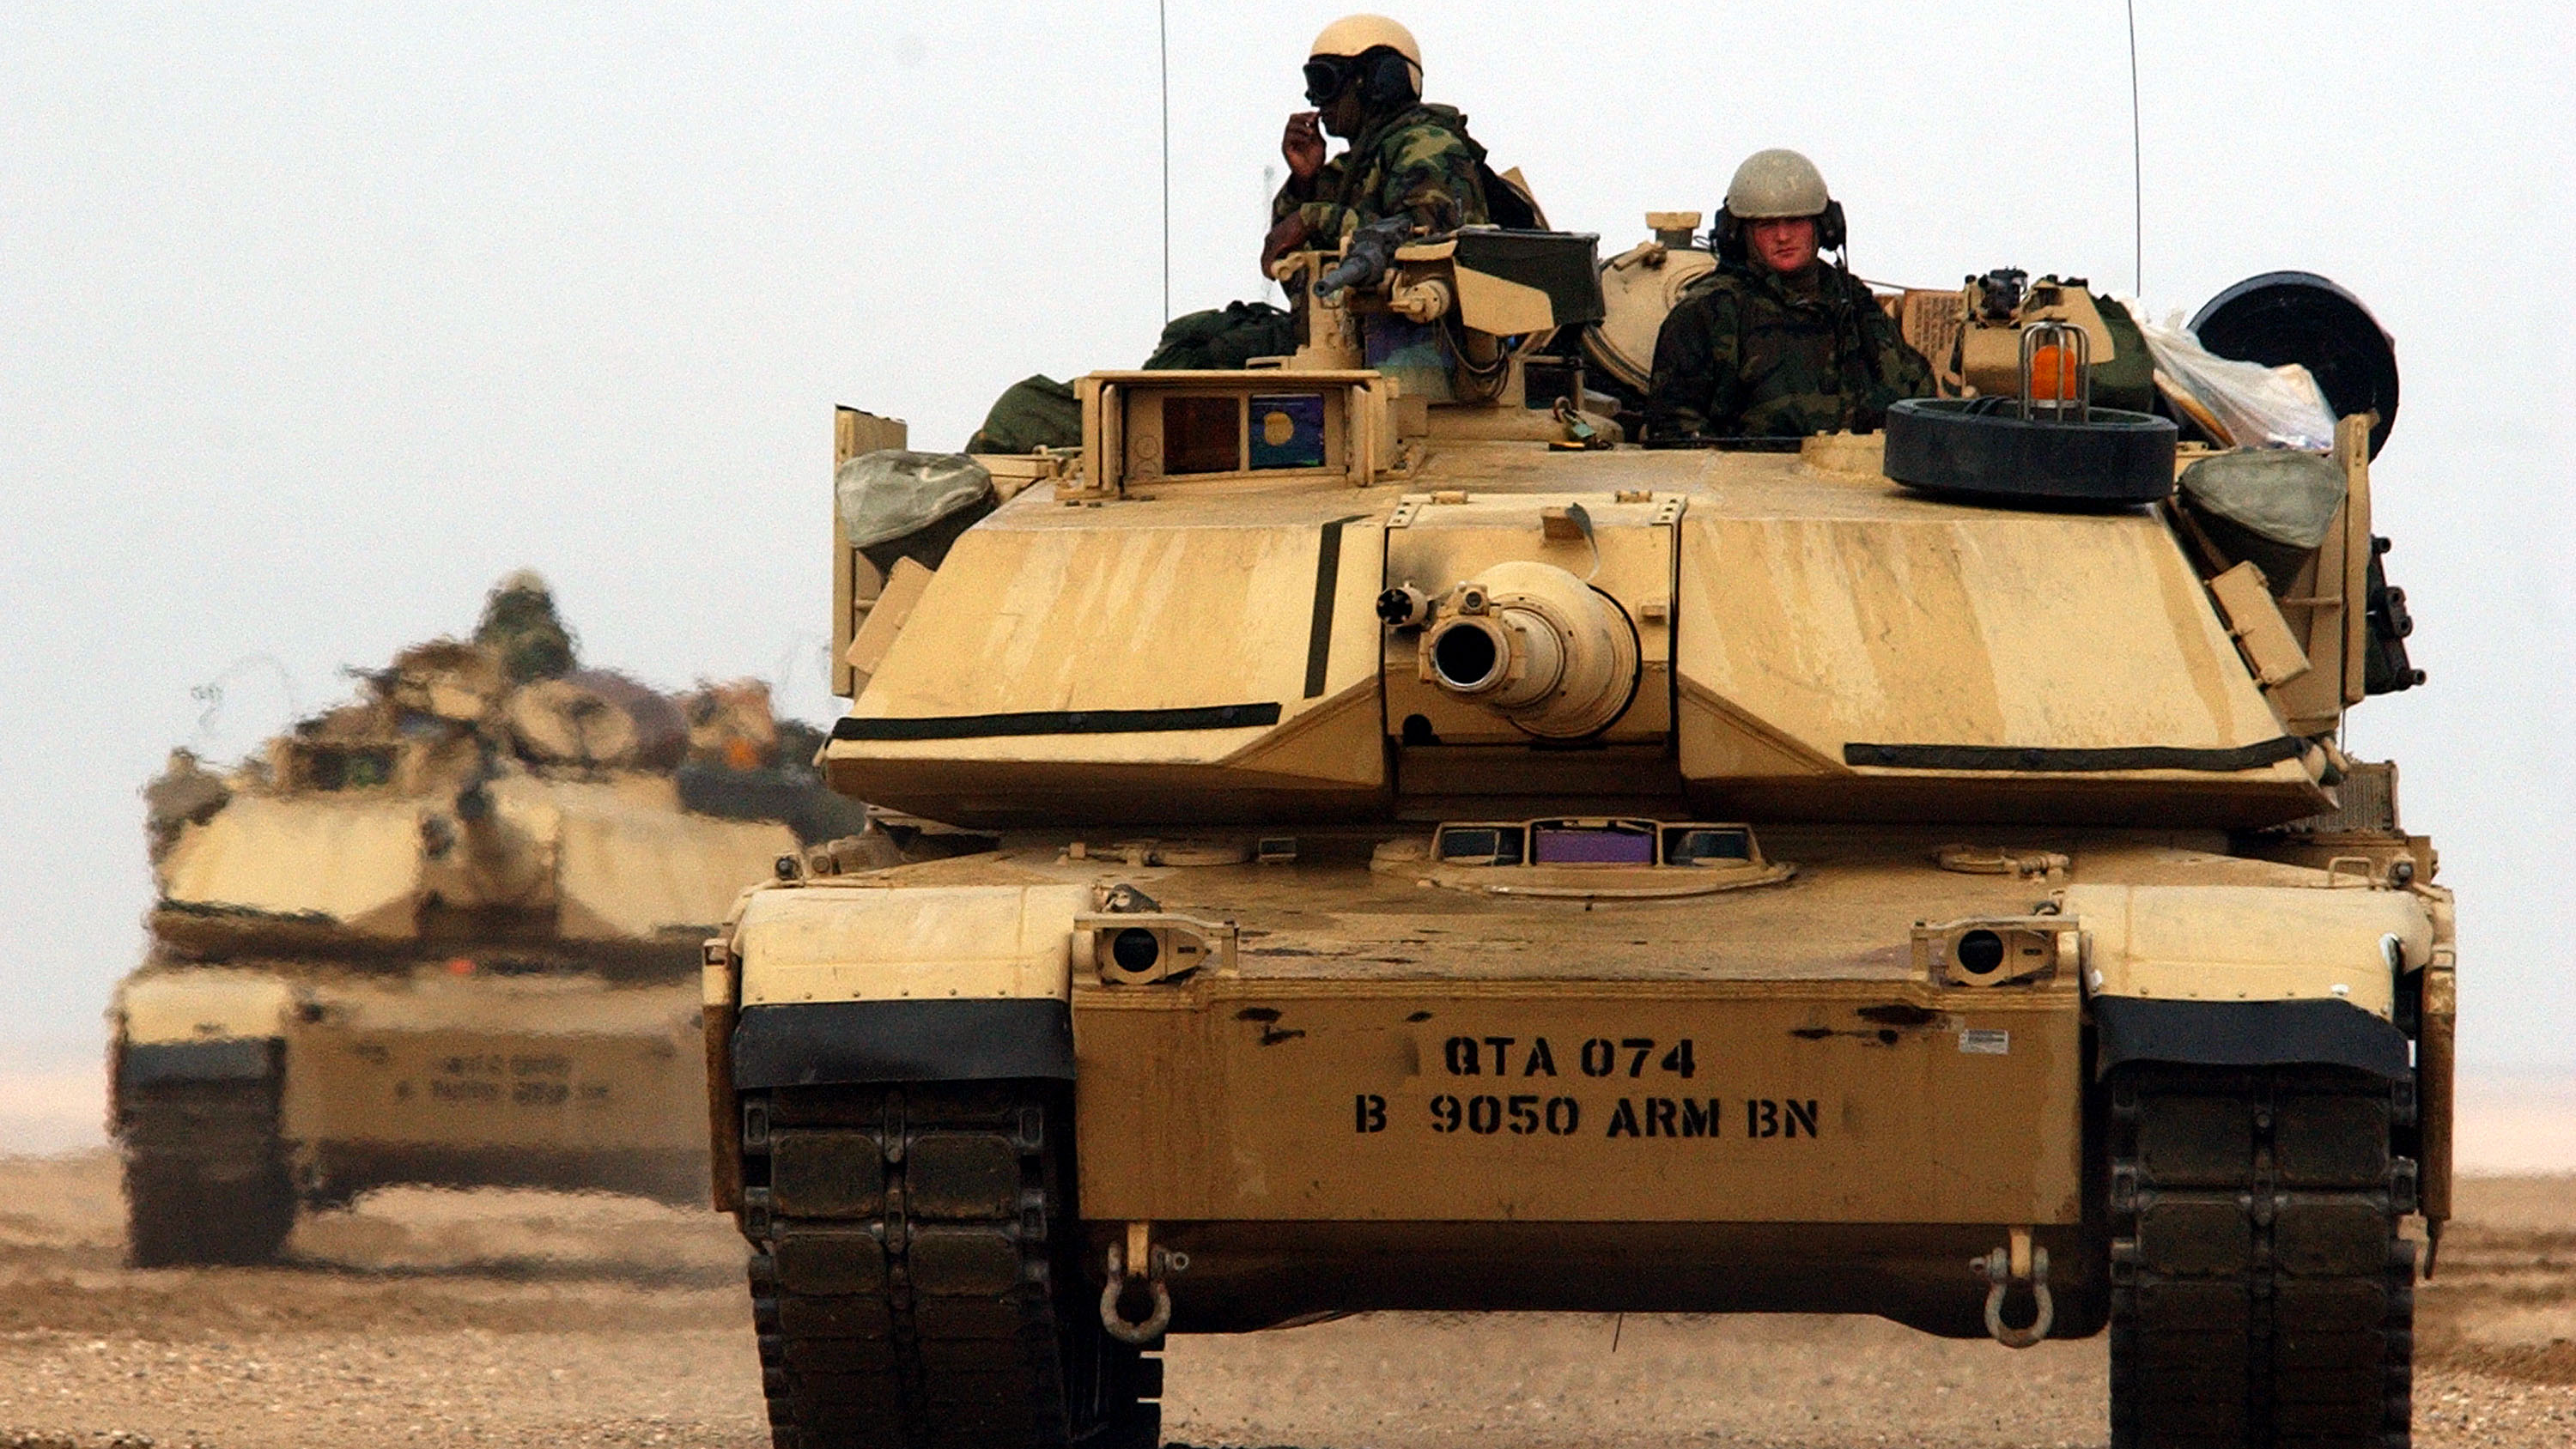  M1/A1 Abrams tanks from the Charlie company 464 Armored Battalion depart for task force manuevers December 17, 2002 near the Iraqi border in the Kuwaiti desert.